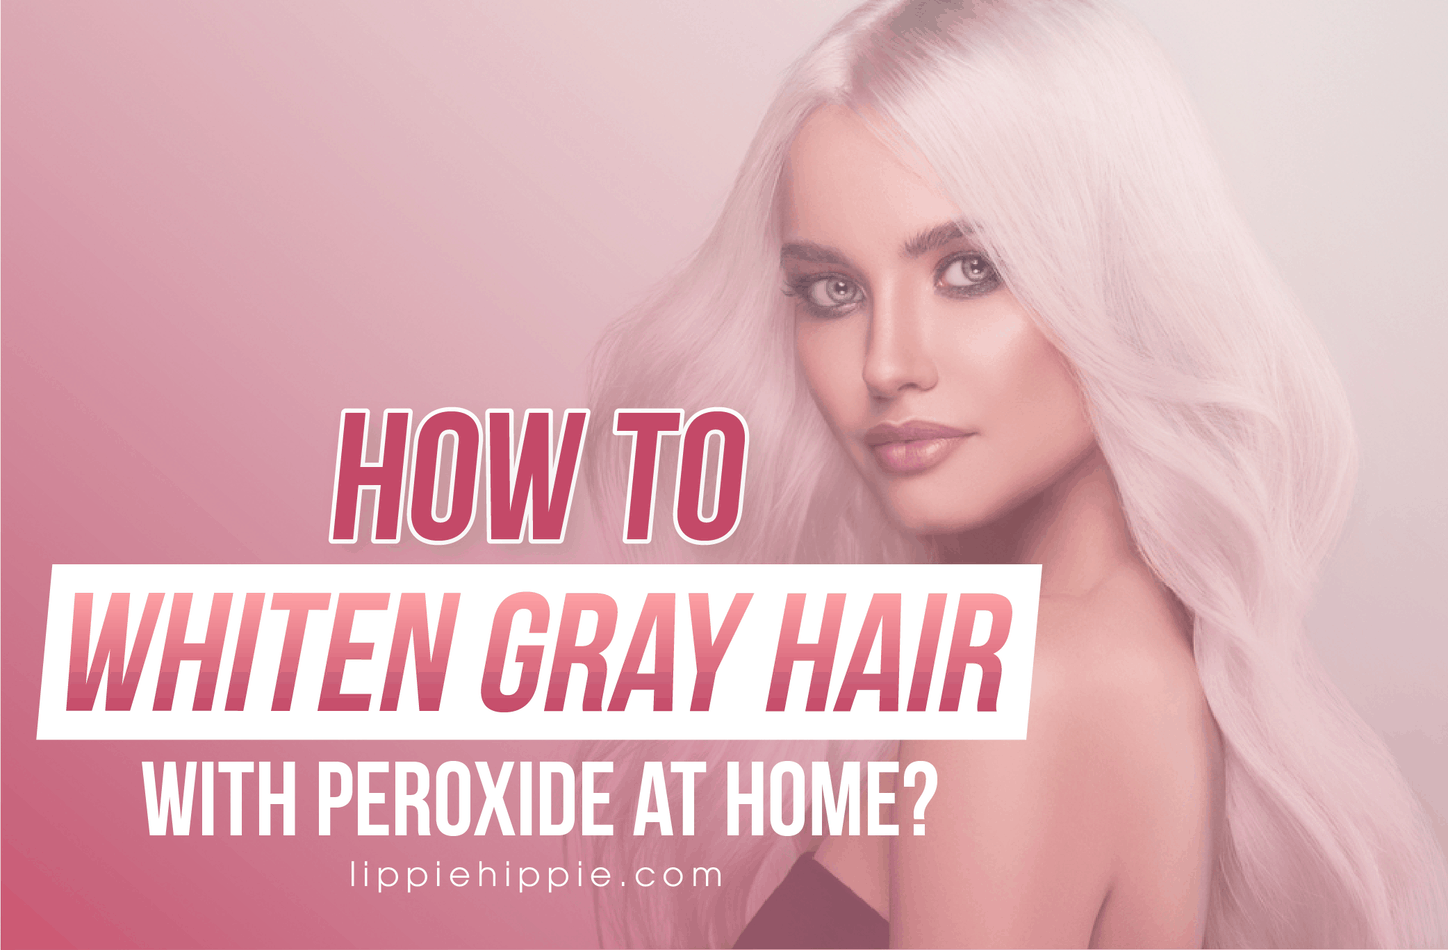 How To Whiten Gray Hair With Peroxide At Home: 4 Easy Steps